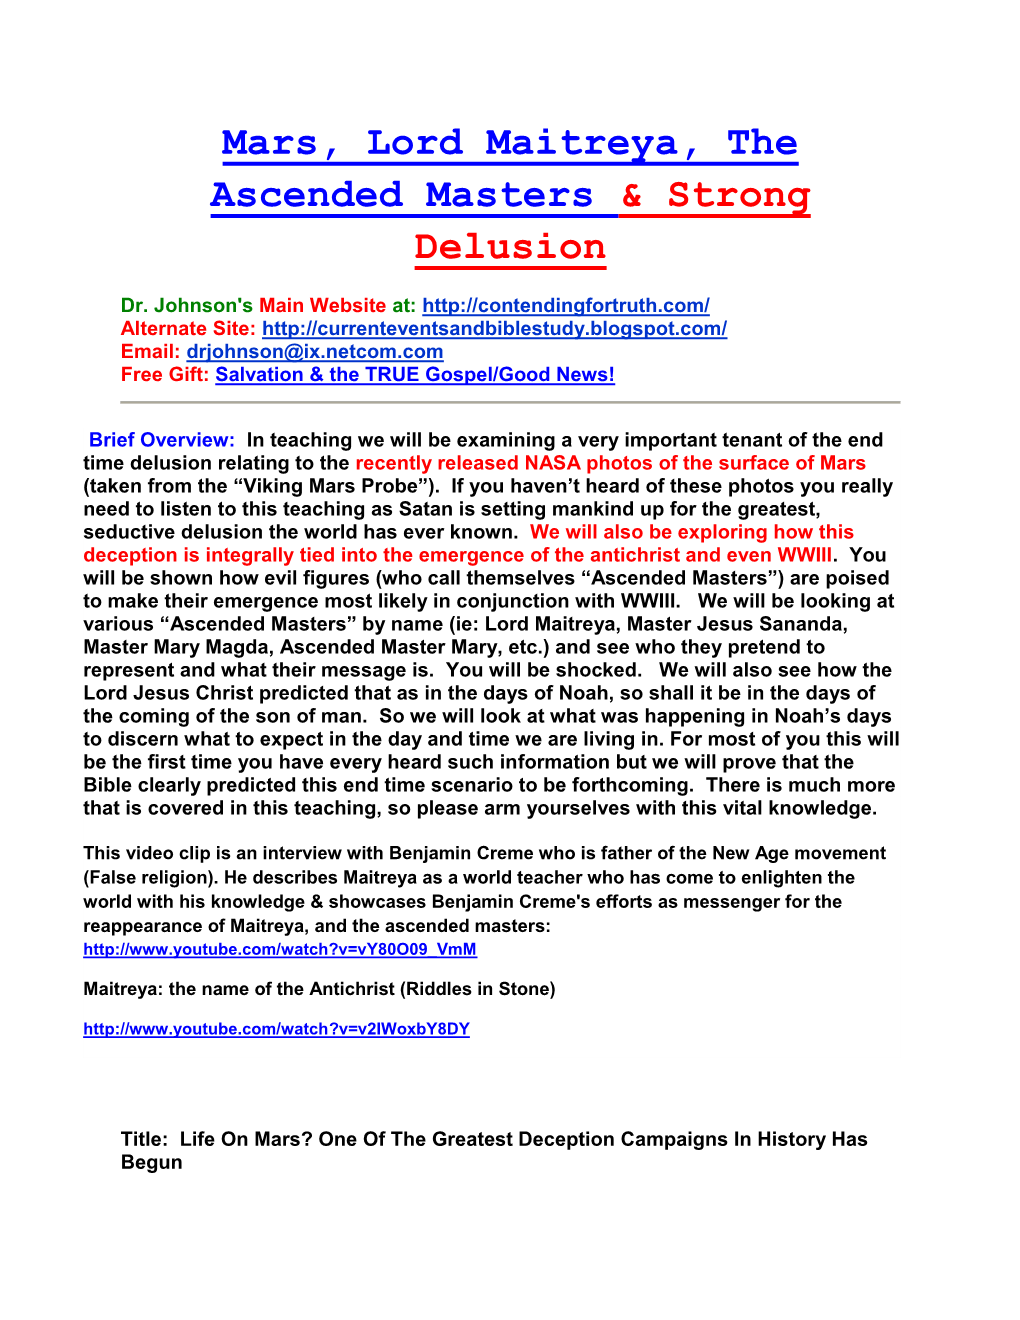 Mars, Lord Maitreya, the Ascended Masters & Strong Delusion